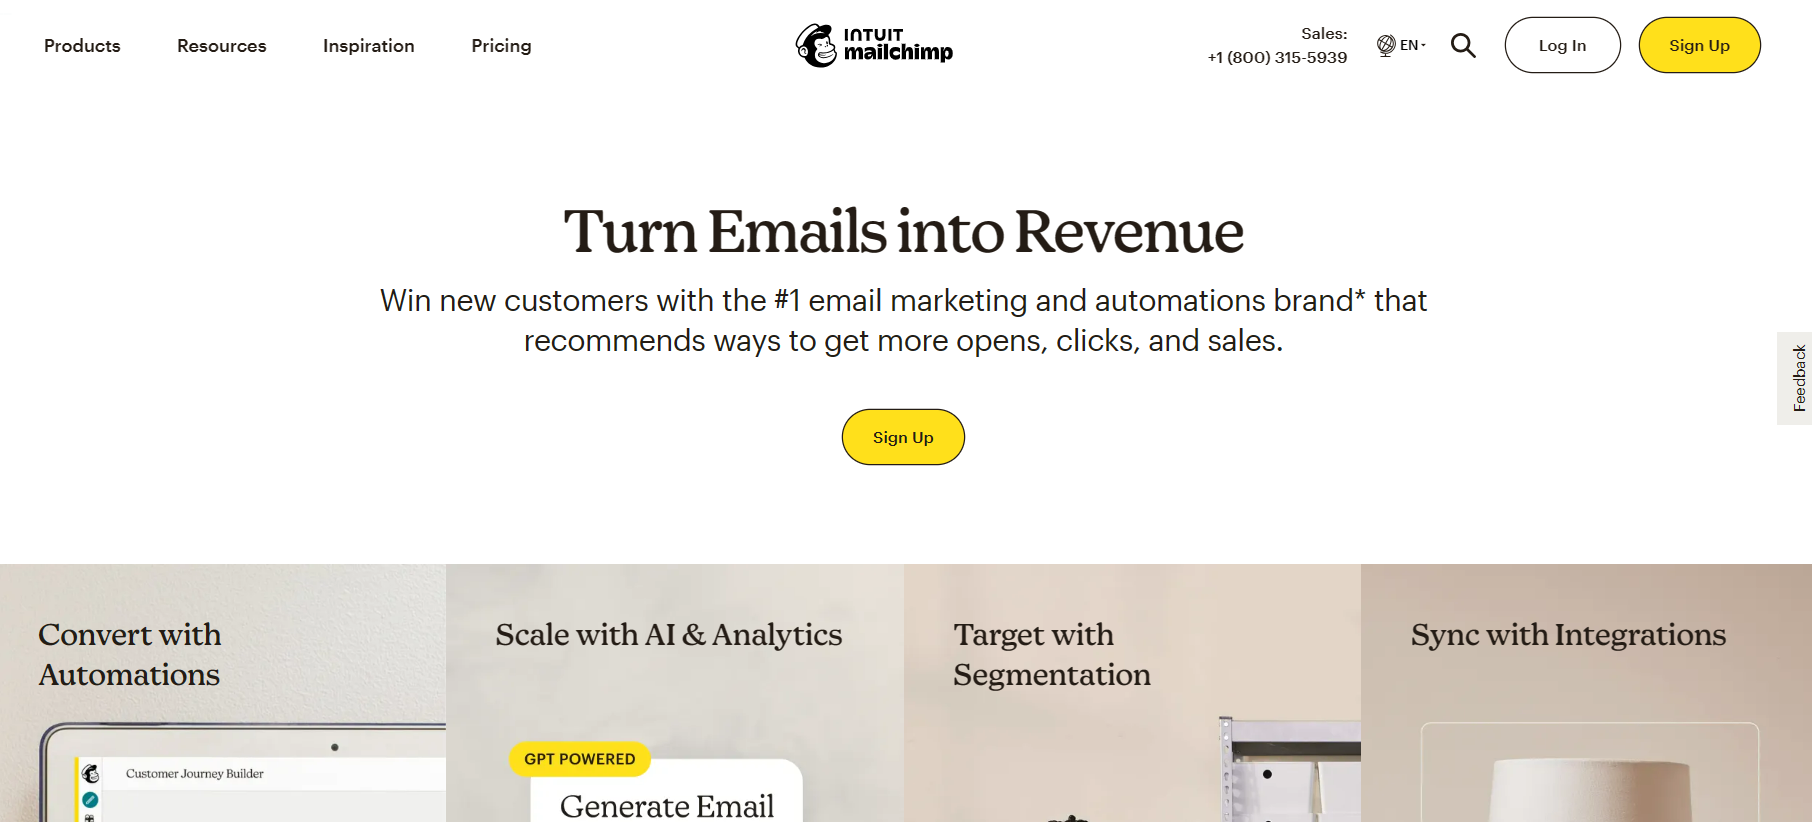 Mailchimp Features: Exploring the Capabilities and Tools of the Email Marketing Platform